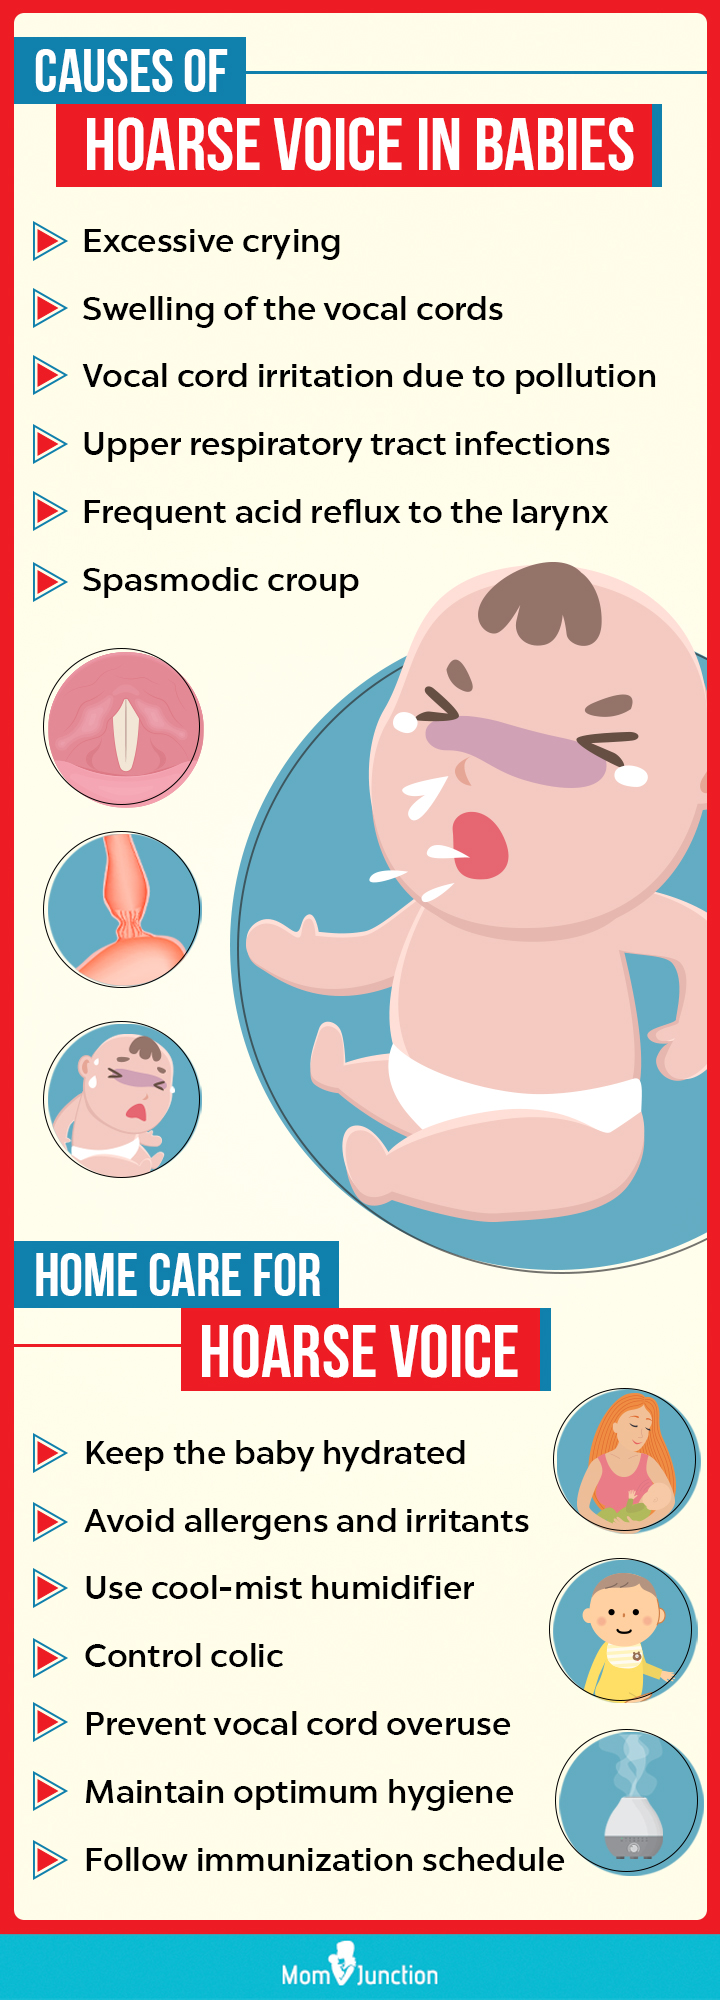 causes of hoarse voice in babies (Infographic)